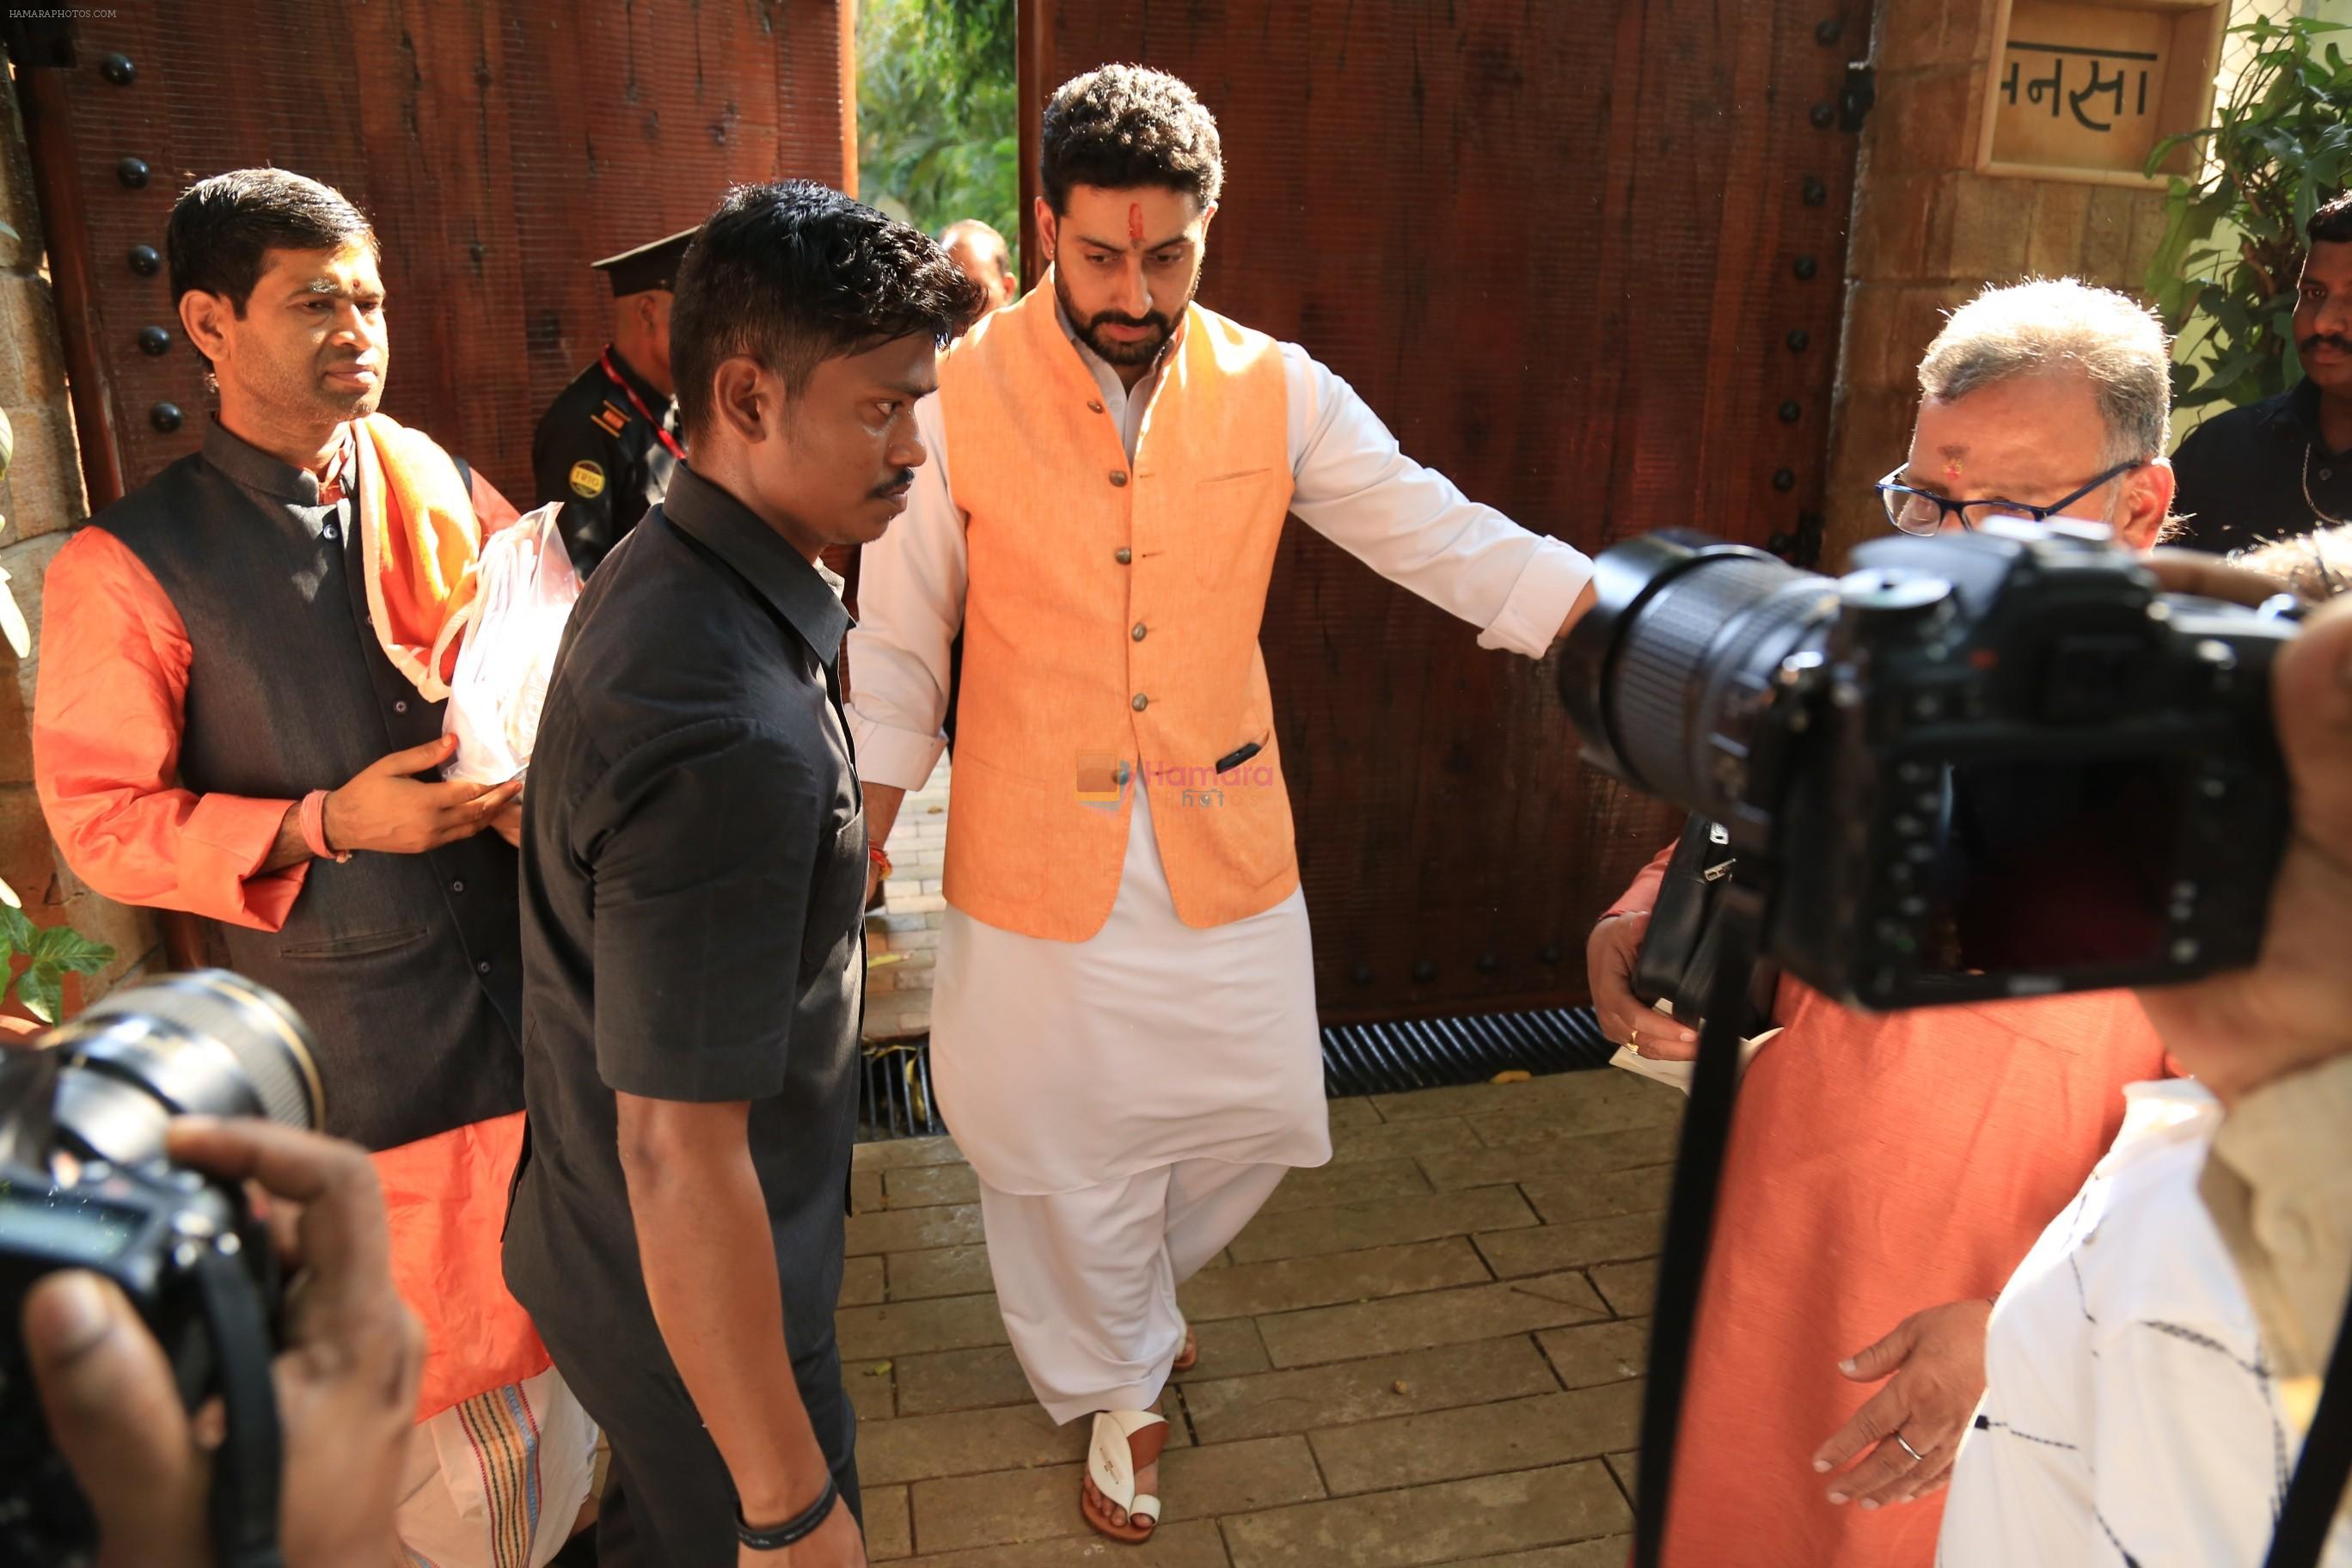 Abhishek Bachchan, Amitabh Bachchan meets his fans outside his juhu residence on the occasion of his birthday on 10th Oct 2018